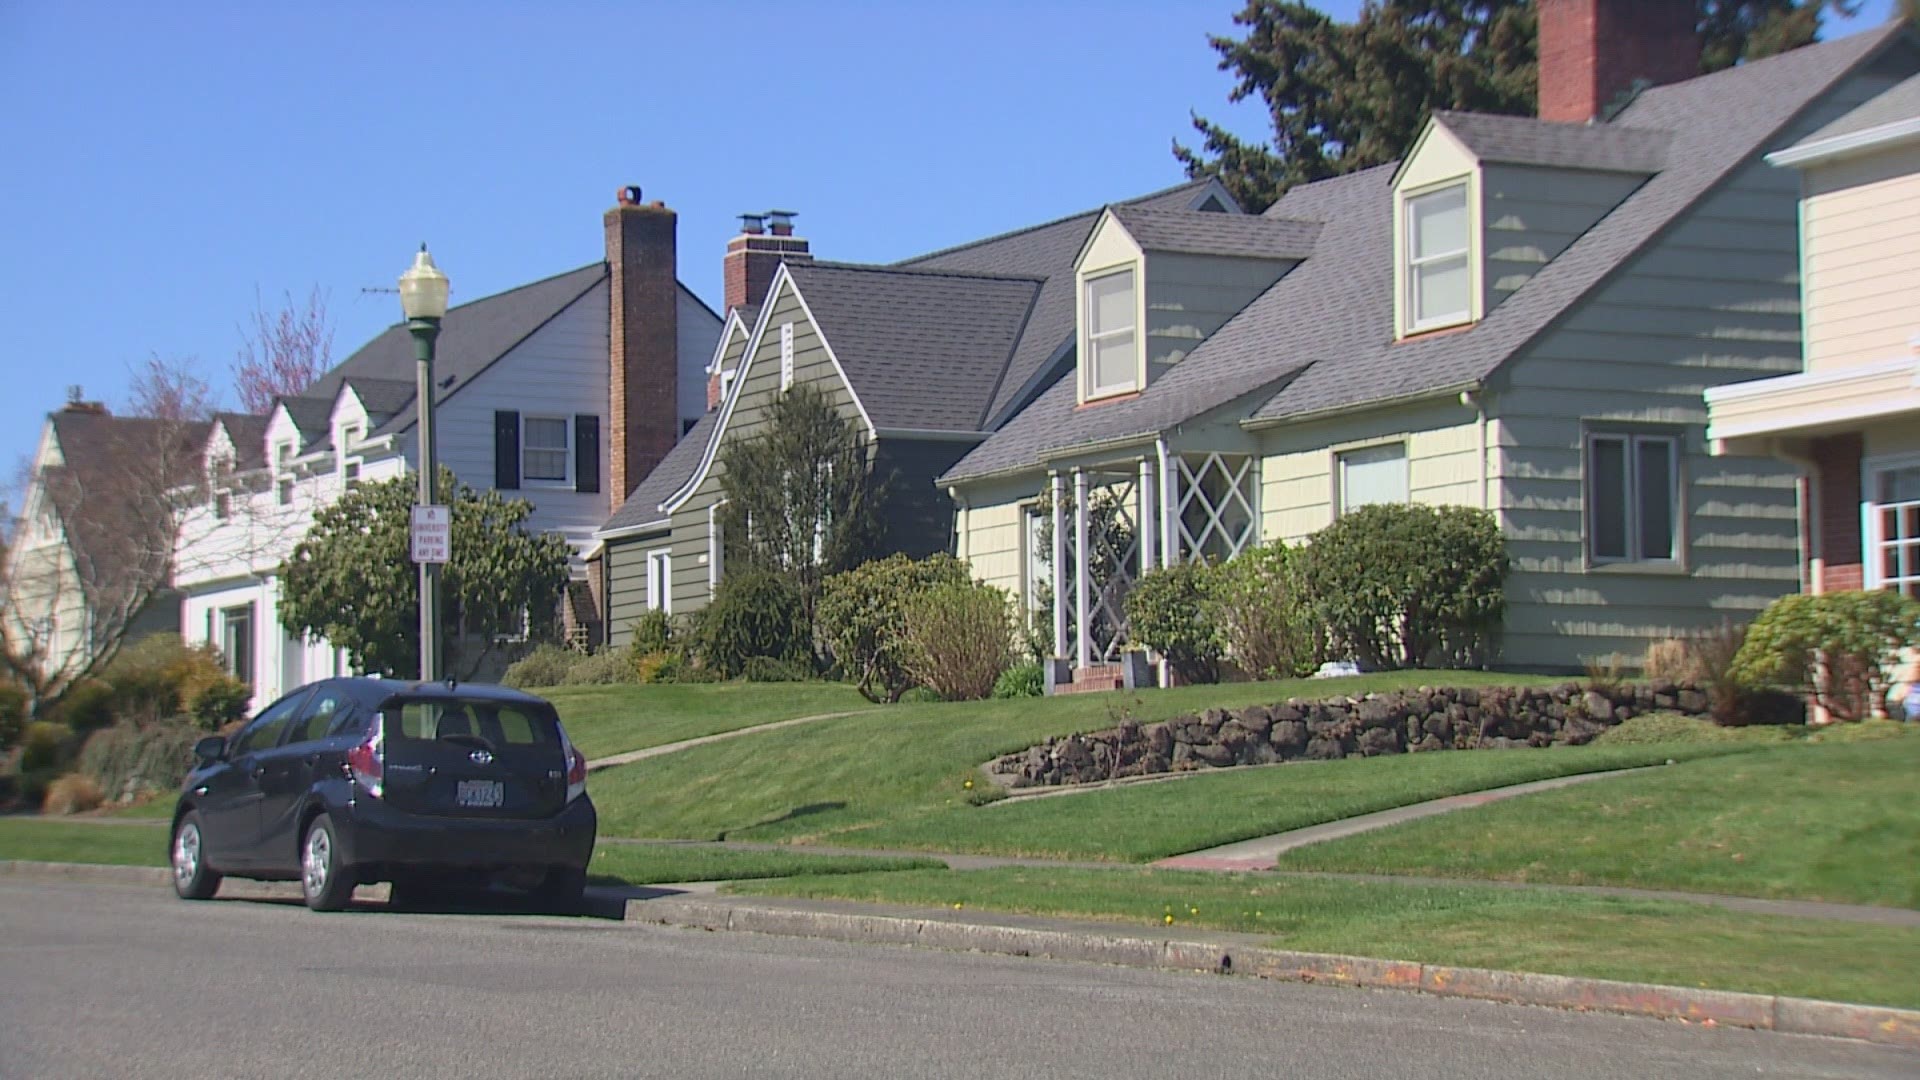 The goal of 'Home in Tacoma' is to increase the variety of types of homes available, through rezoning and other measures.